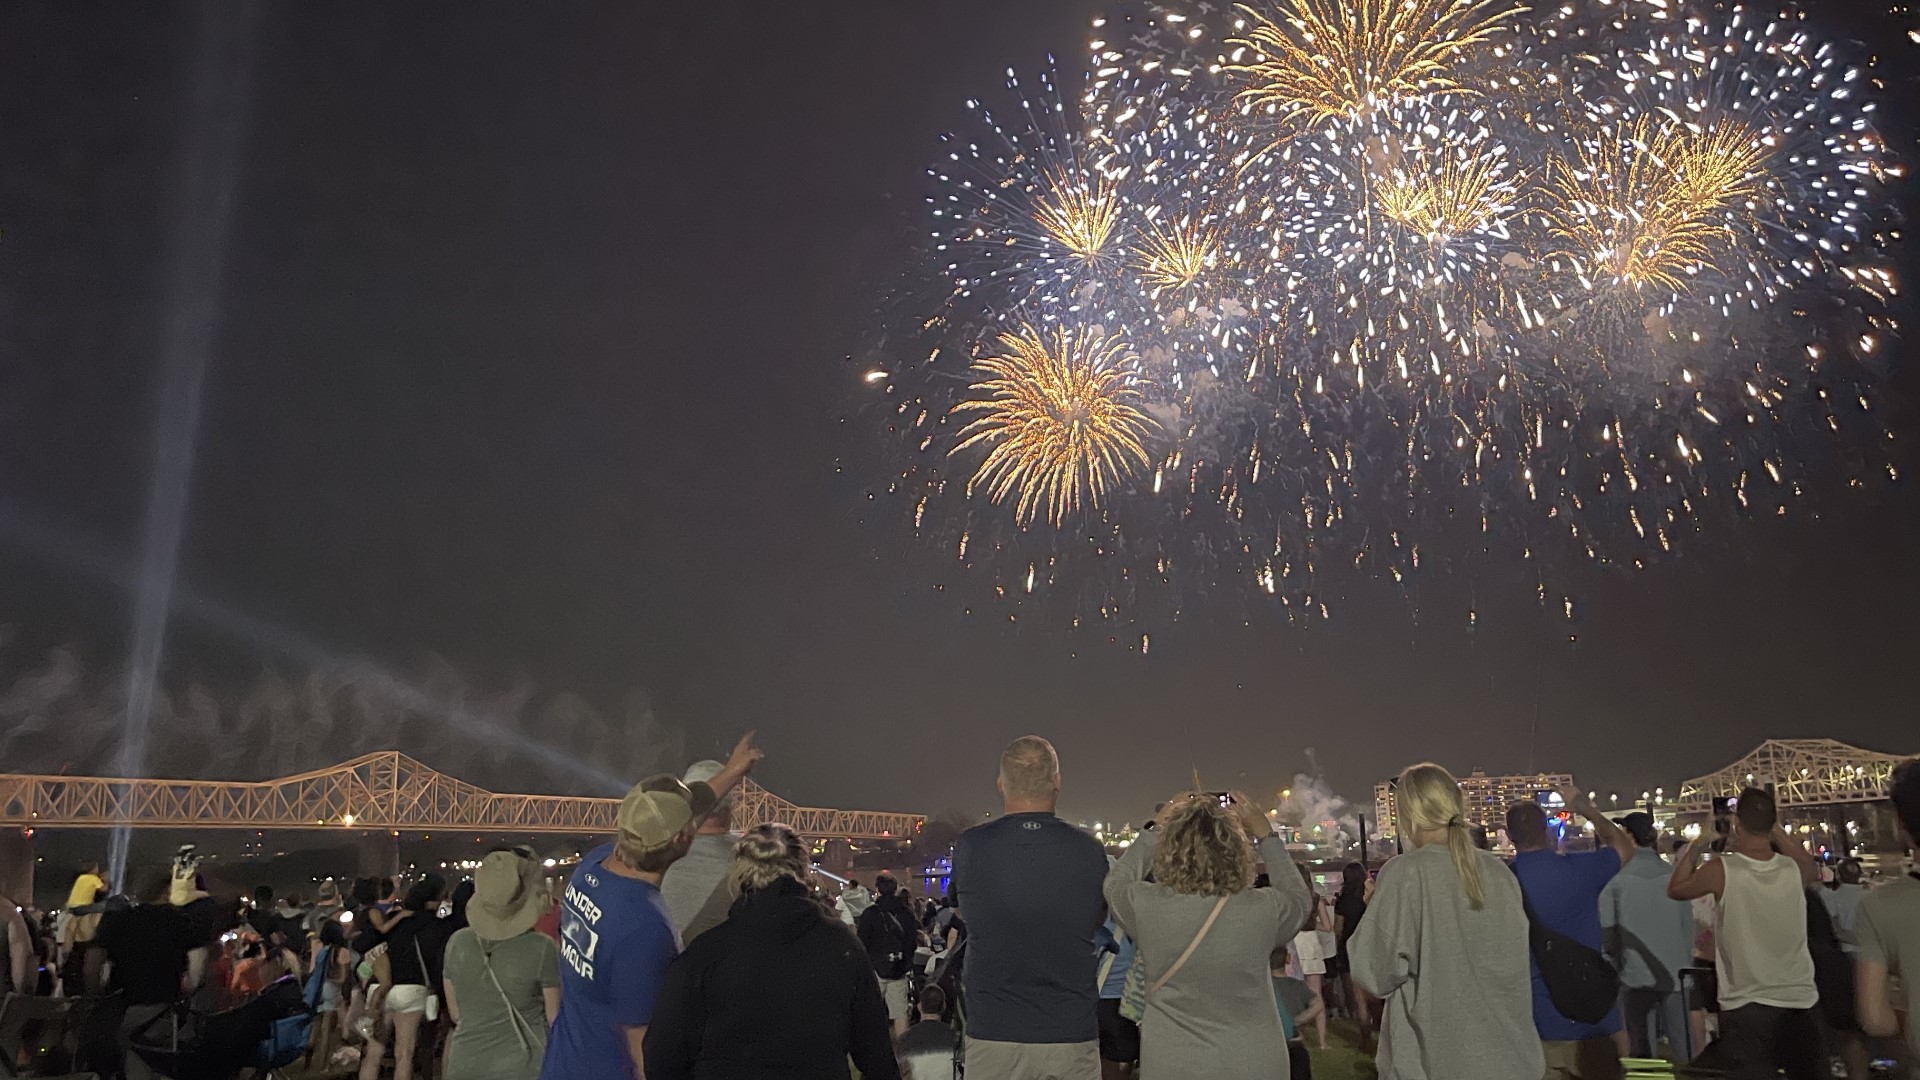 People told WHAS11 they were excited by the fireworks and want to come back next year.